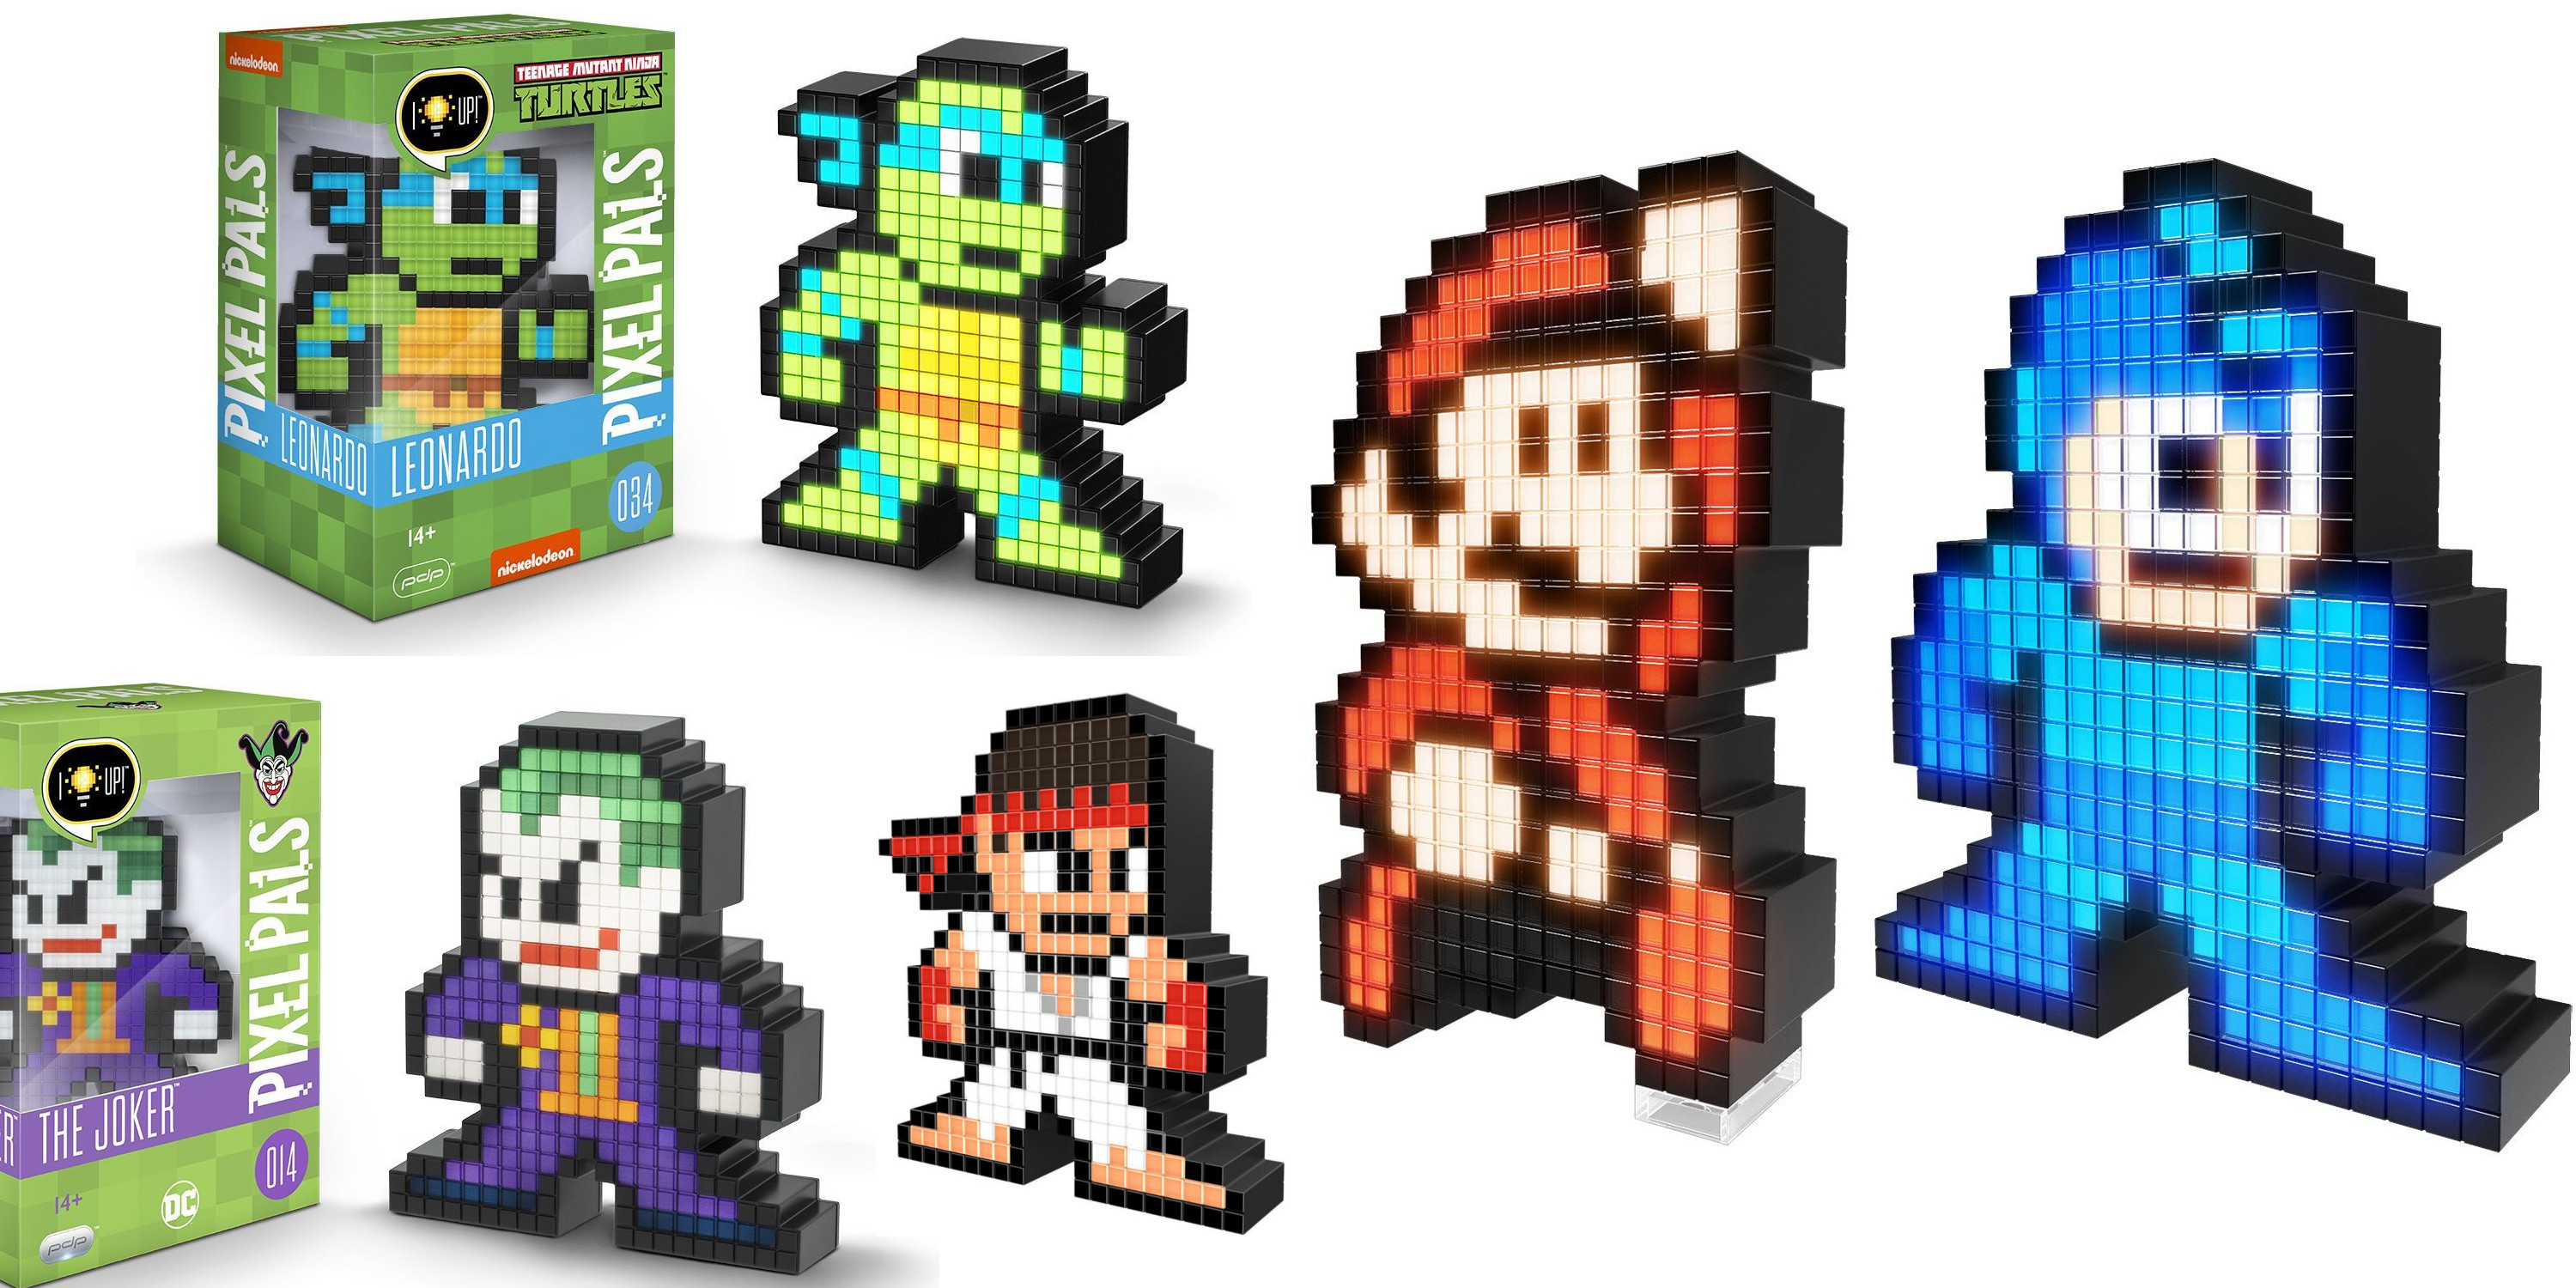 Light-up Pixel Pals figures down to $5 at Best Buy: Vault Boy, Mario, Sonic  and more